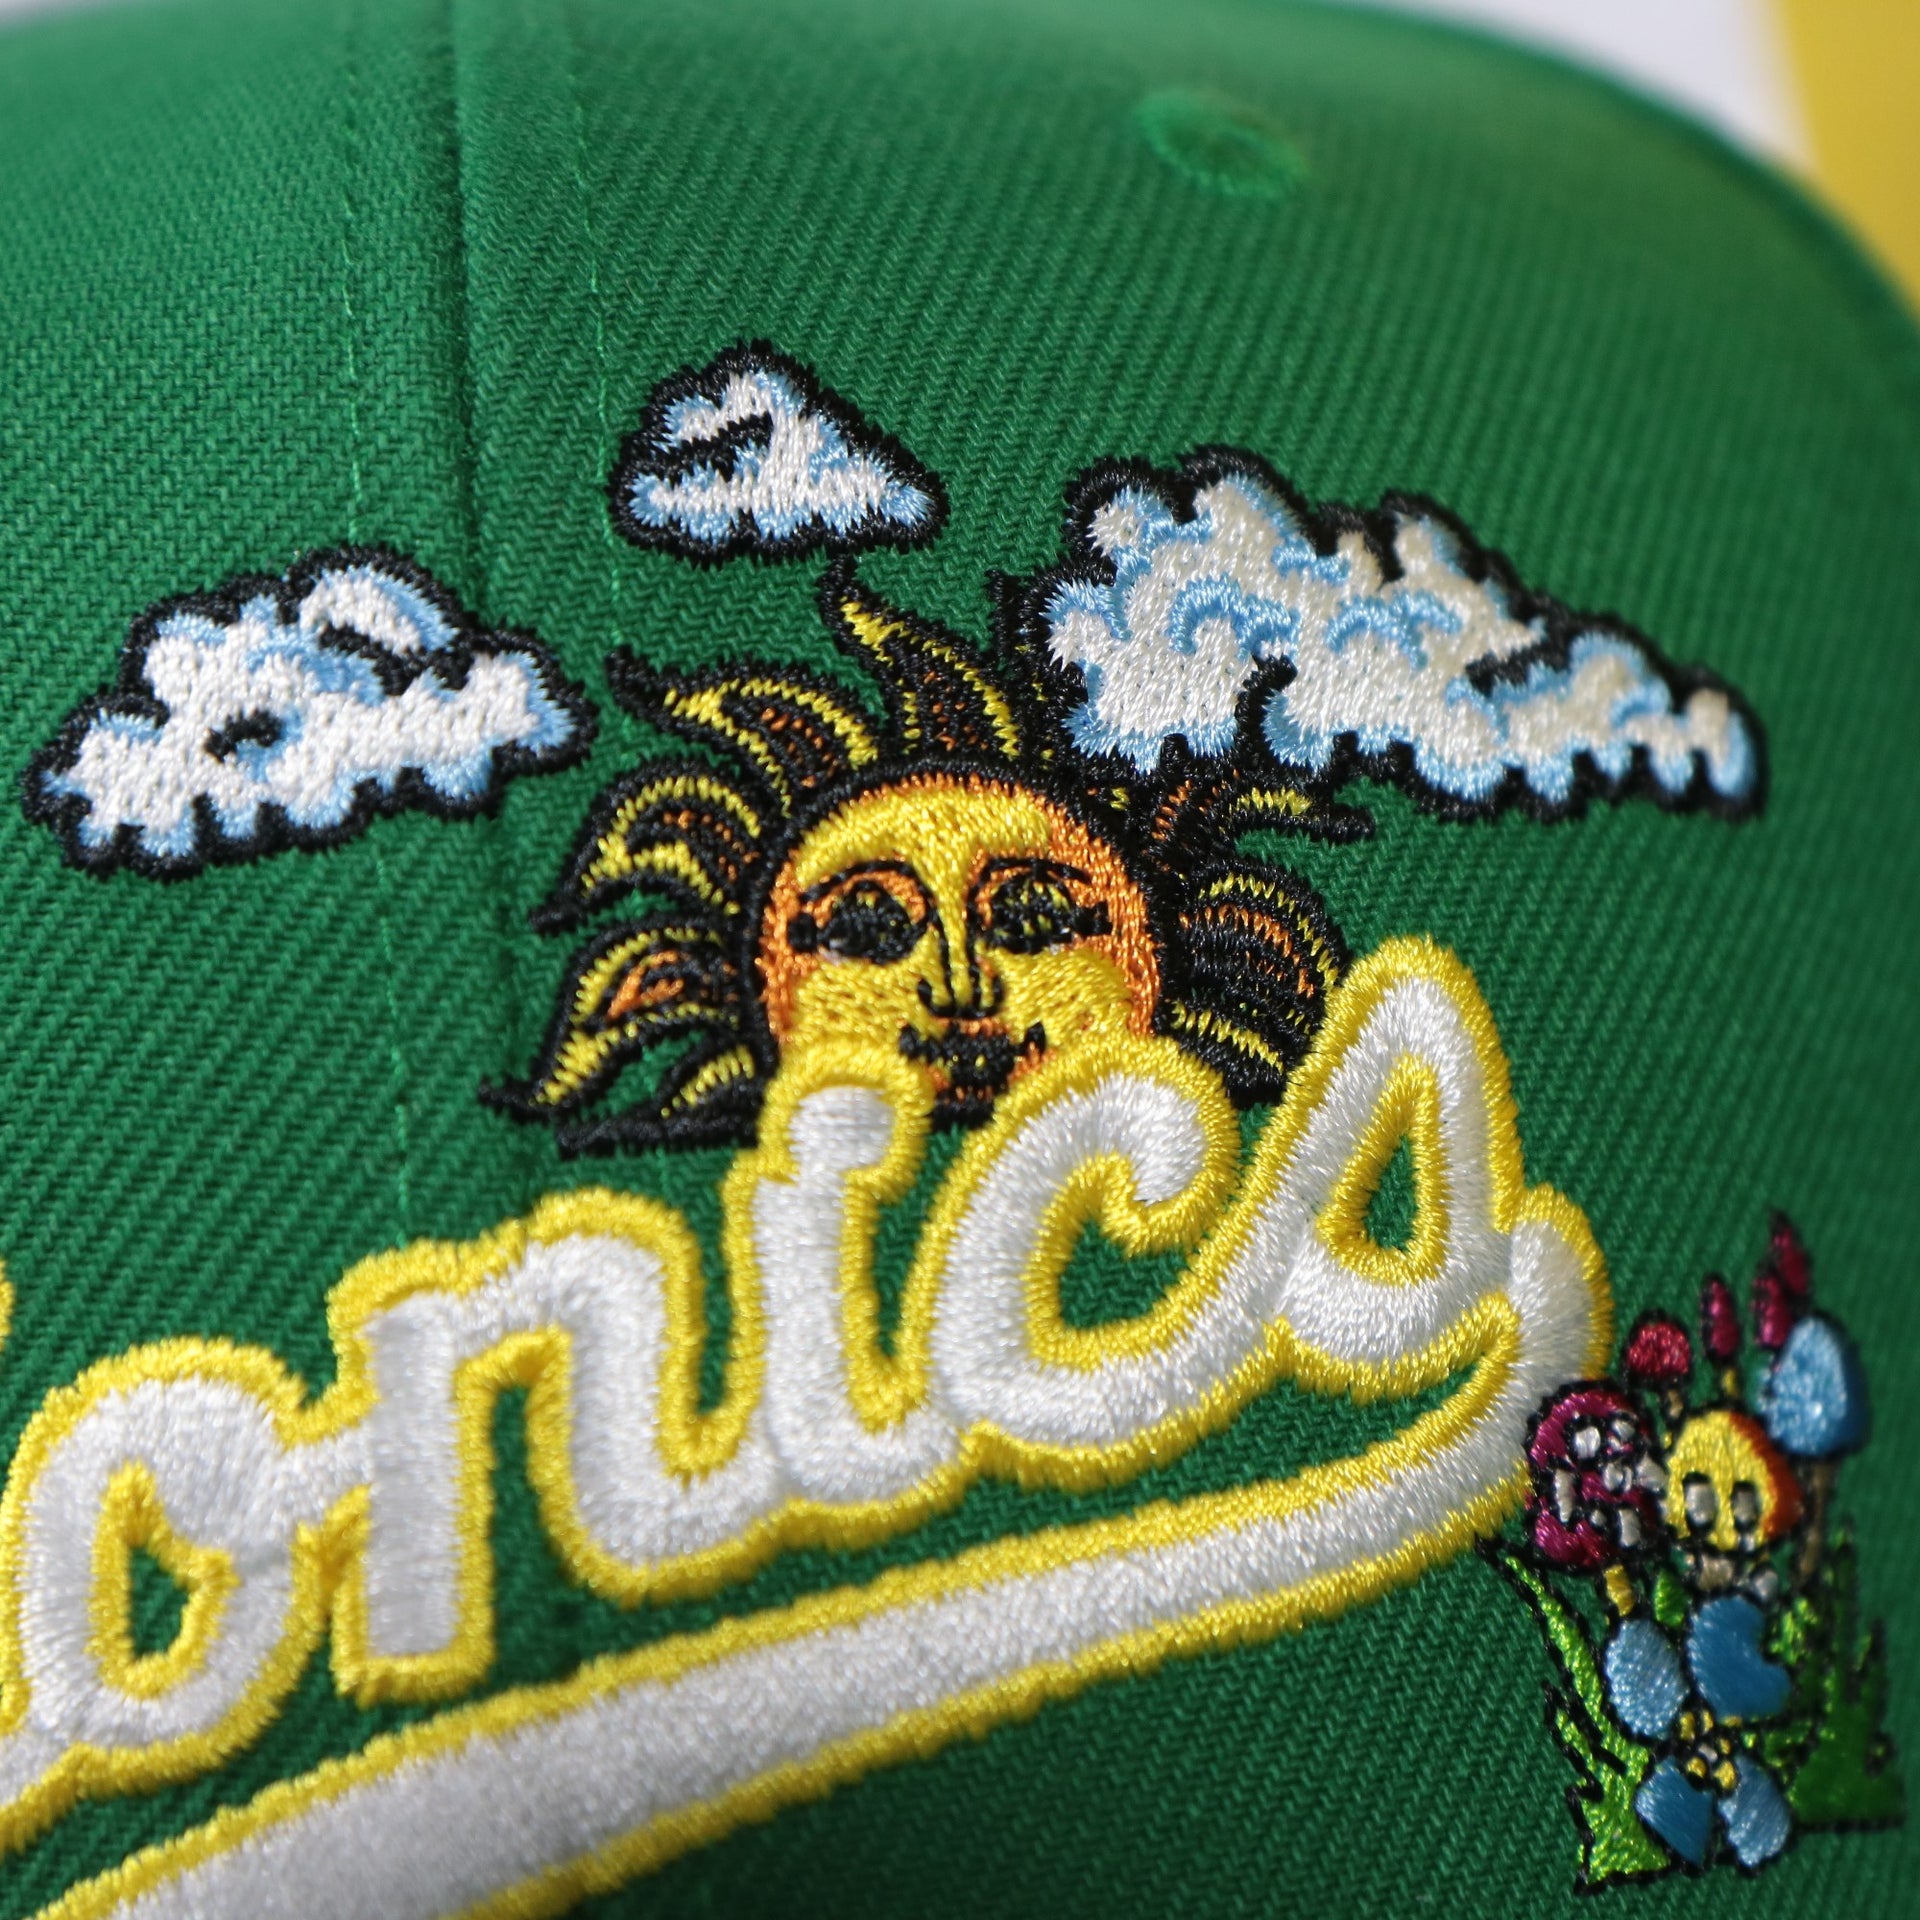 psychedelic patch on the Seattle Supersonics Throwback Wordmark Hardwood Classics  All Over Energy Psychedelic patch | Green Snapback hat